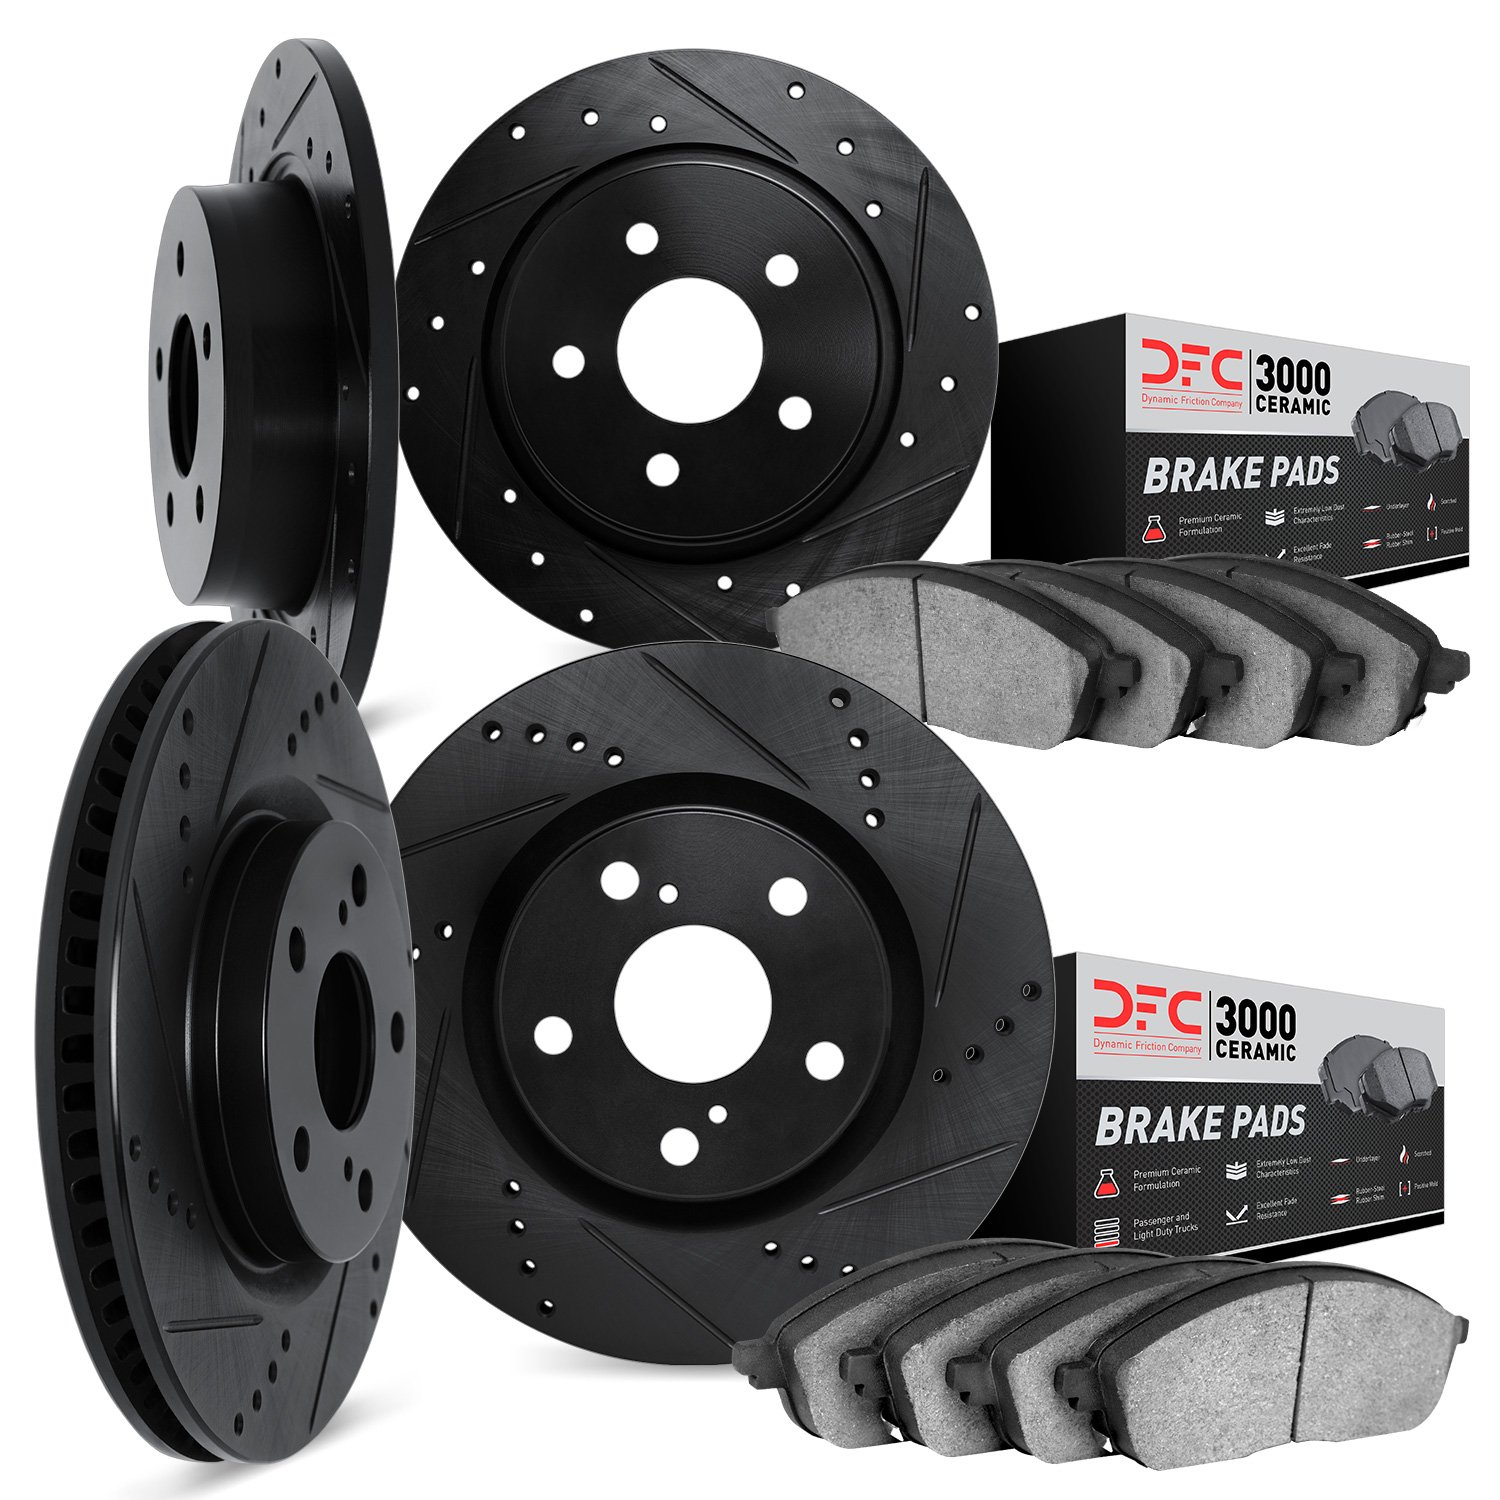 8304-39006 Drilled/Slotted Brake Rotors with 3000-Series Ceramic Brake Pads Kit [Black], 2001-2003 Mopar, Position: Front and Re